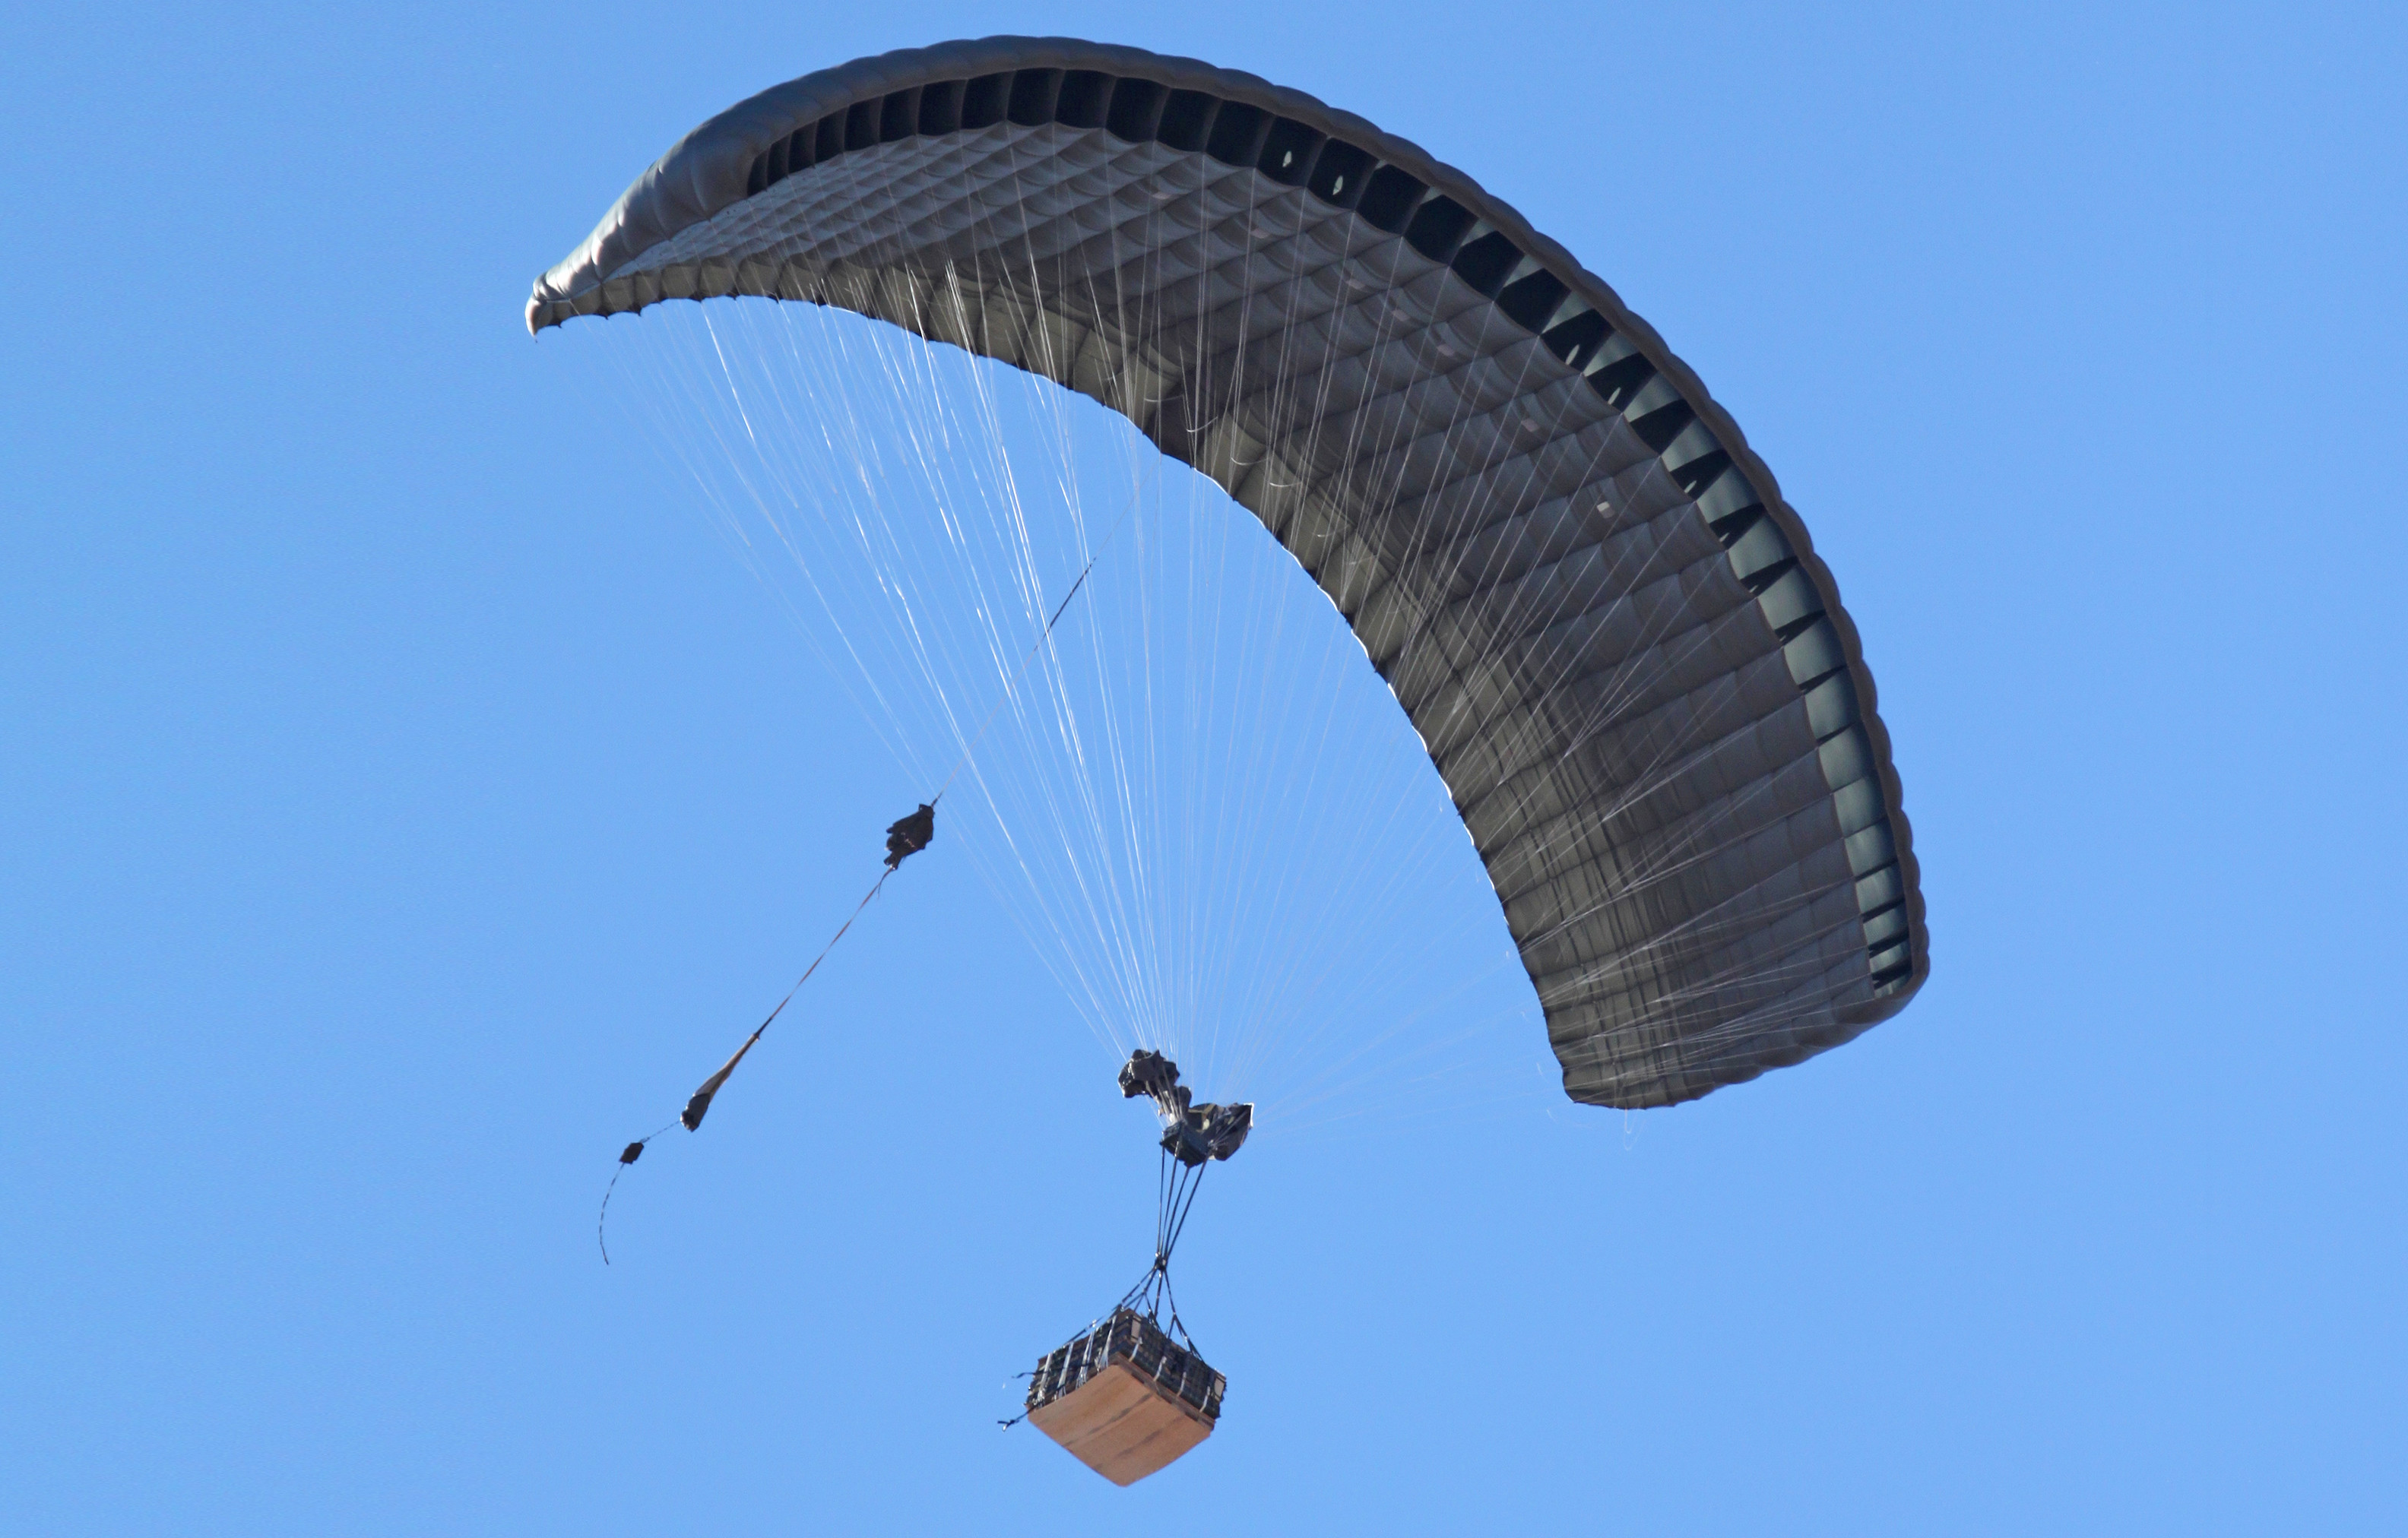 Airborne Systems - DragonFly Army Cargo Delivery Parachute System. JPADS 10K System of Choice. Eliptical canopy carries loads up to 10,000 lbs. Max altitude 24,500 ft. Military cargo and canopy, blue sky.